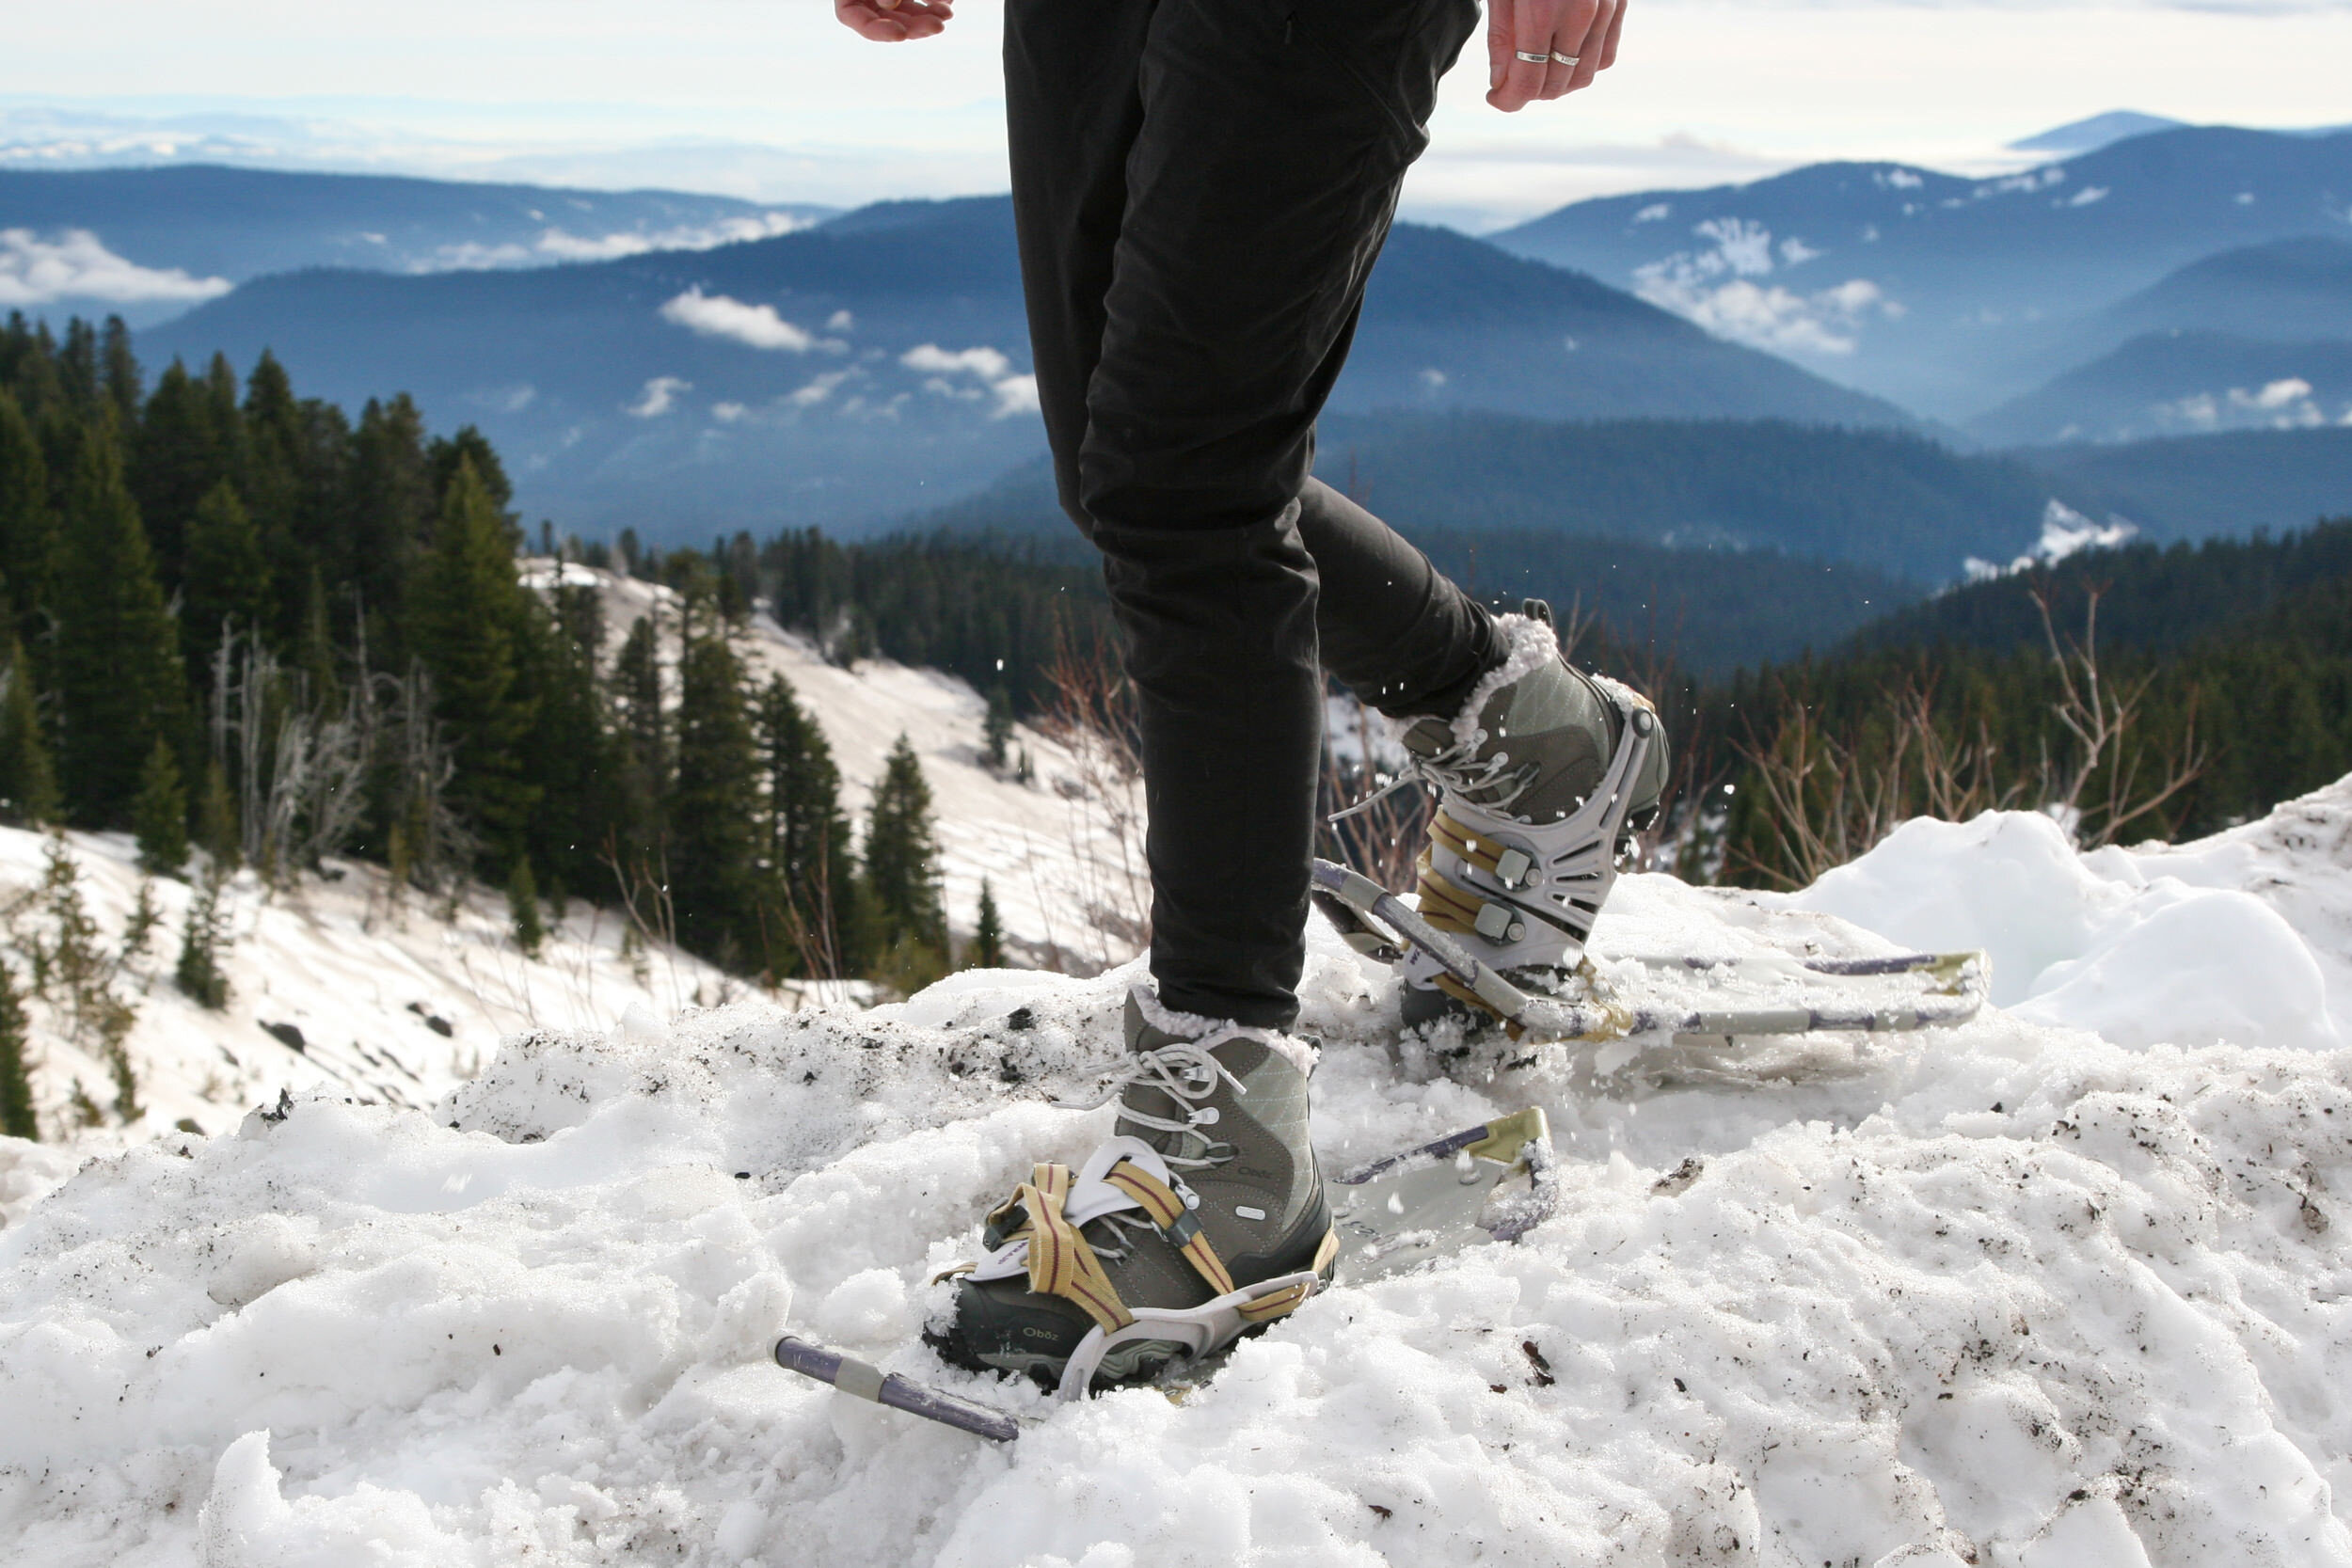 Oboz Bridger 7” Bdry Insulated Boots are excellent for snowshoeing